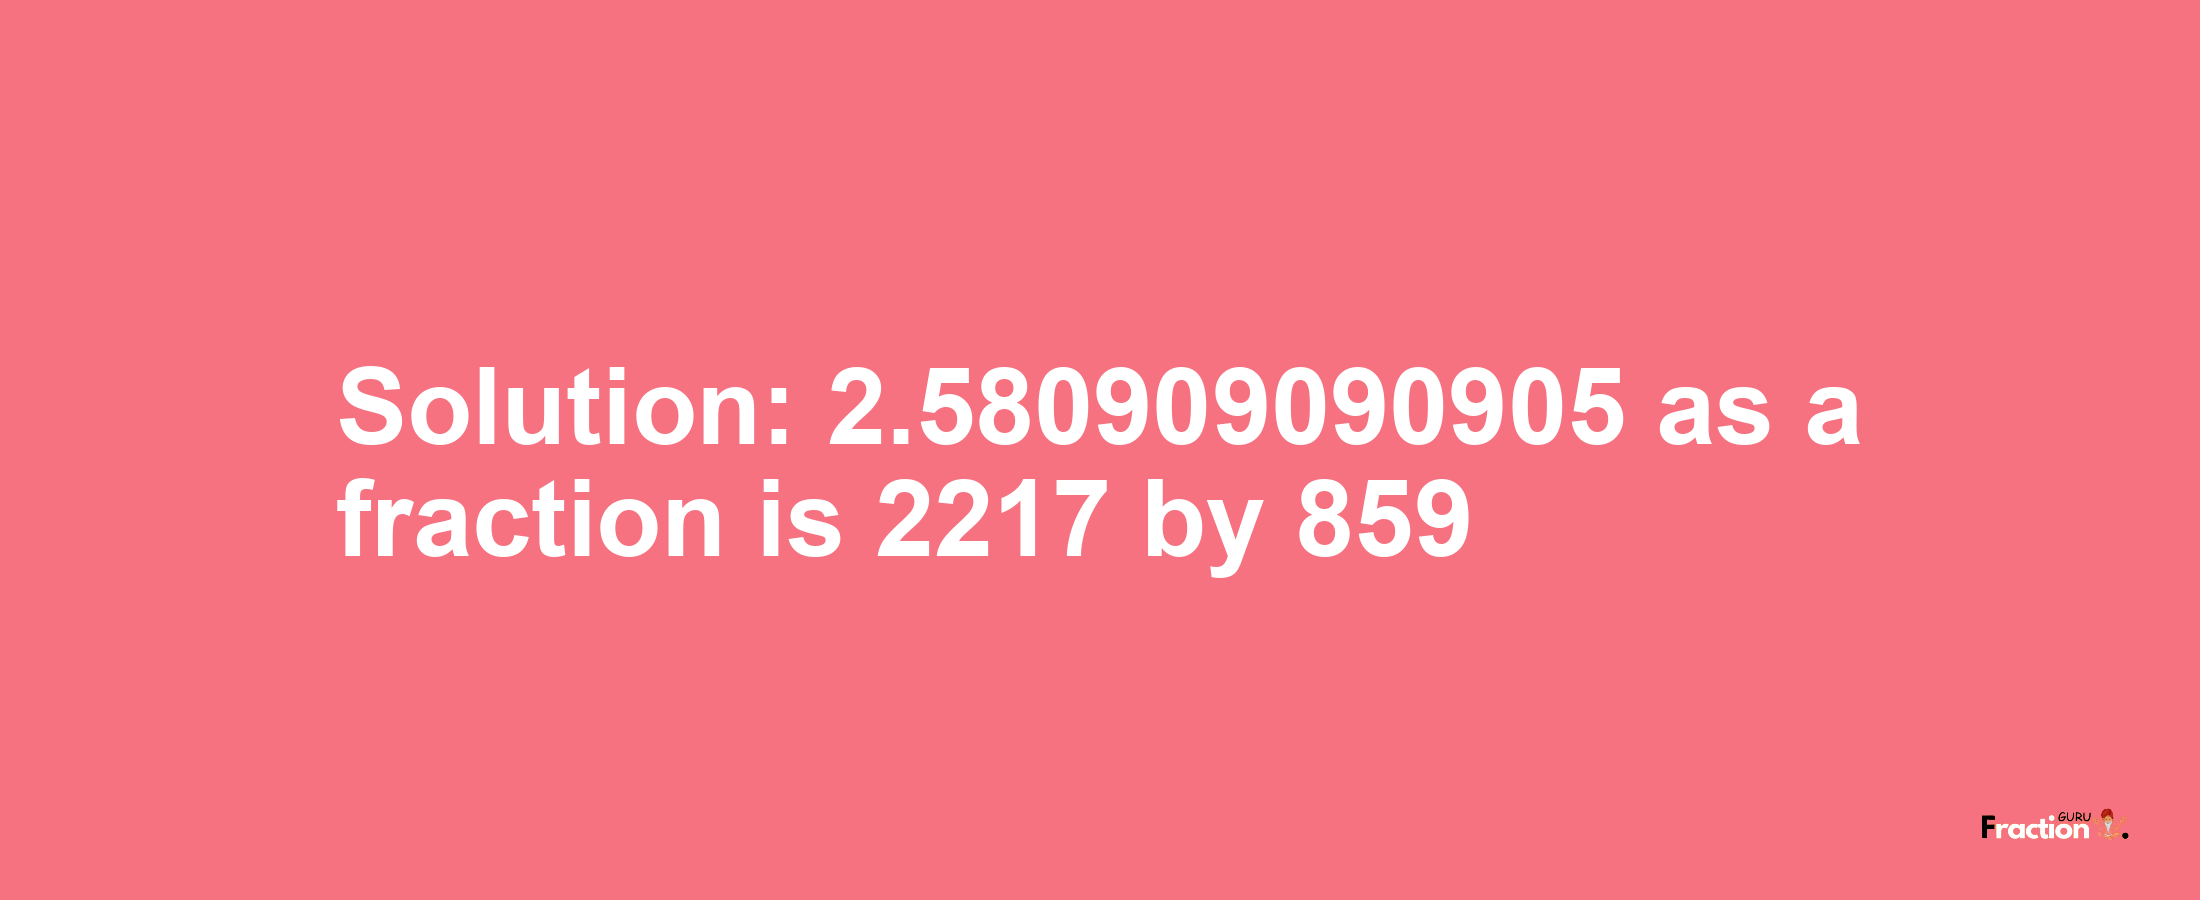 Solution:2.580909090905 as a fraction is 2217/859